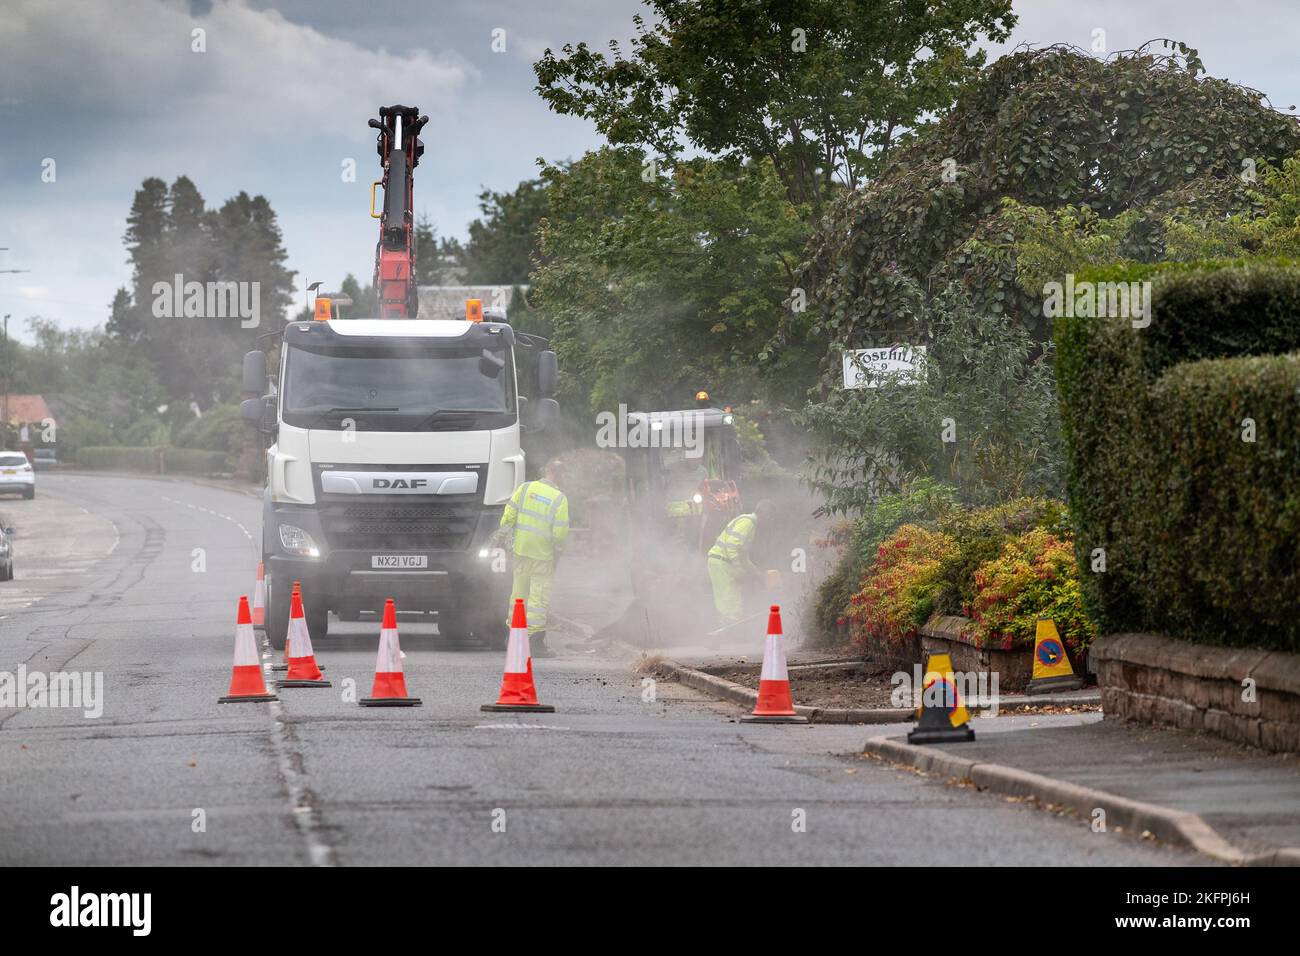 Repairs on a pavement in the Scottish market town of Lockerbie, Dumfries and Galloway, UK Stock Photo